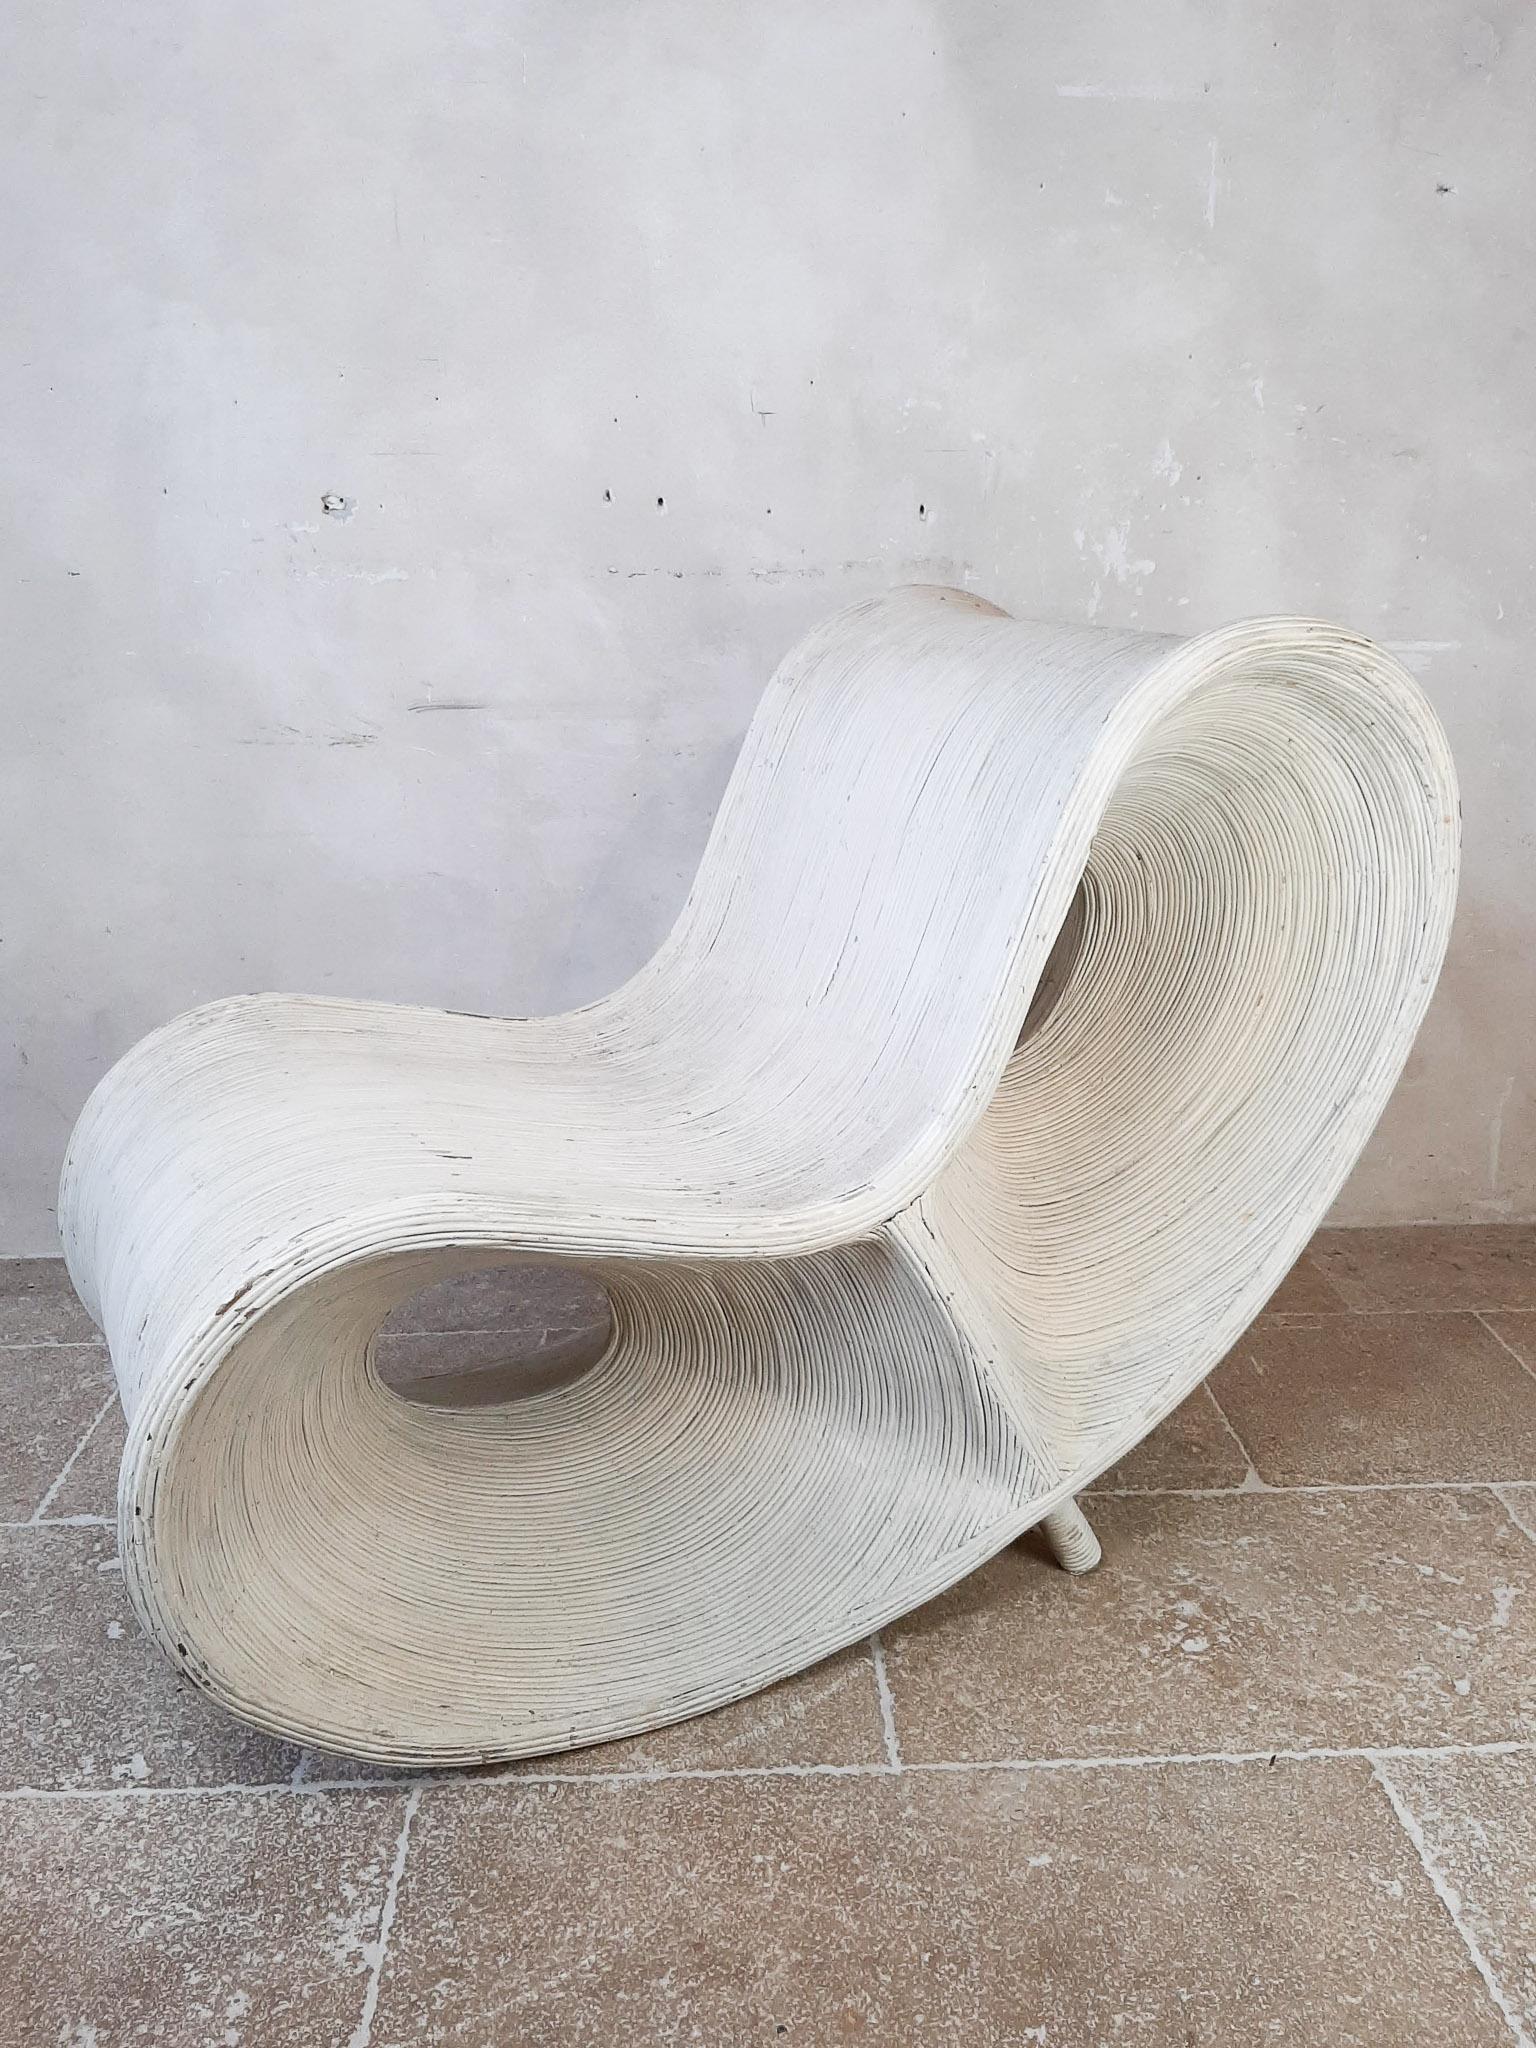 Ron Arad lounge chair. Painted white rattan chair attributed to Ron Arad.

Art and sculpture 'meets' design. 360 degrees finished. A special piece!

Measures: L 120 x W 66 x H 94 cm.